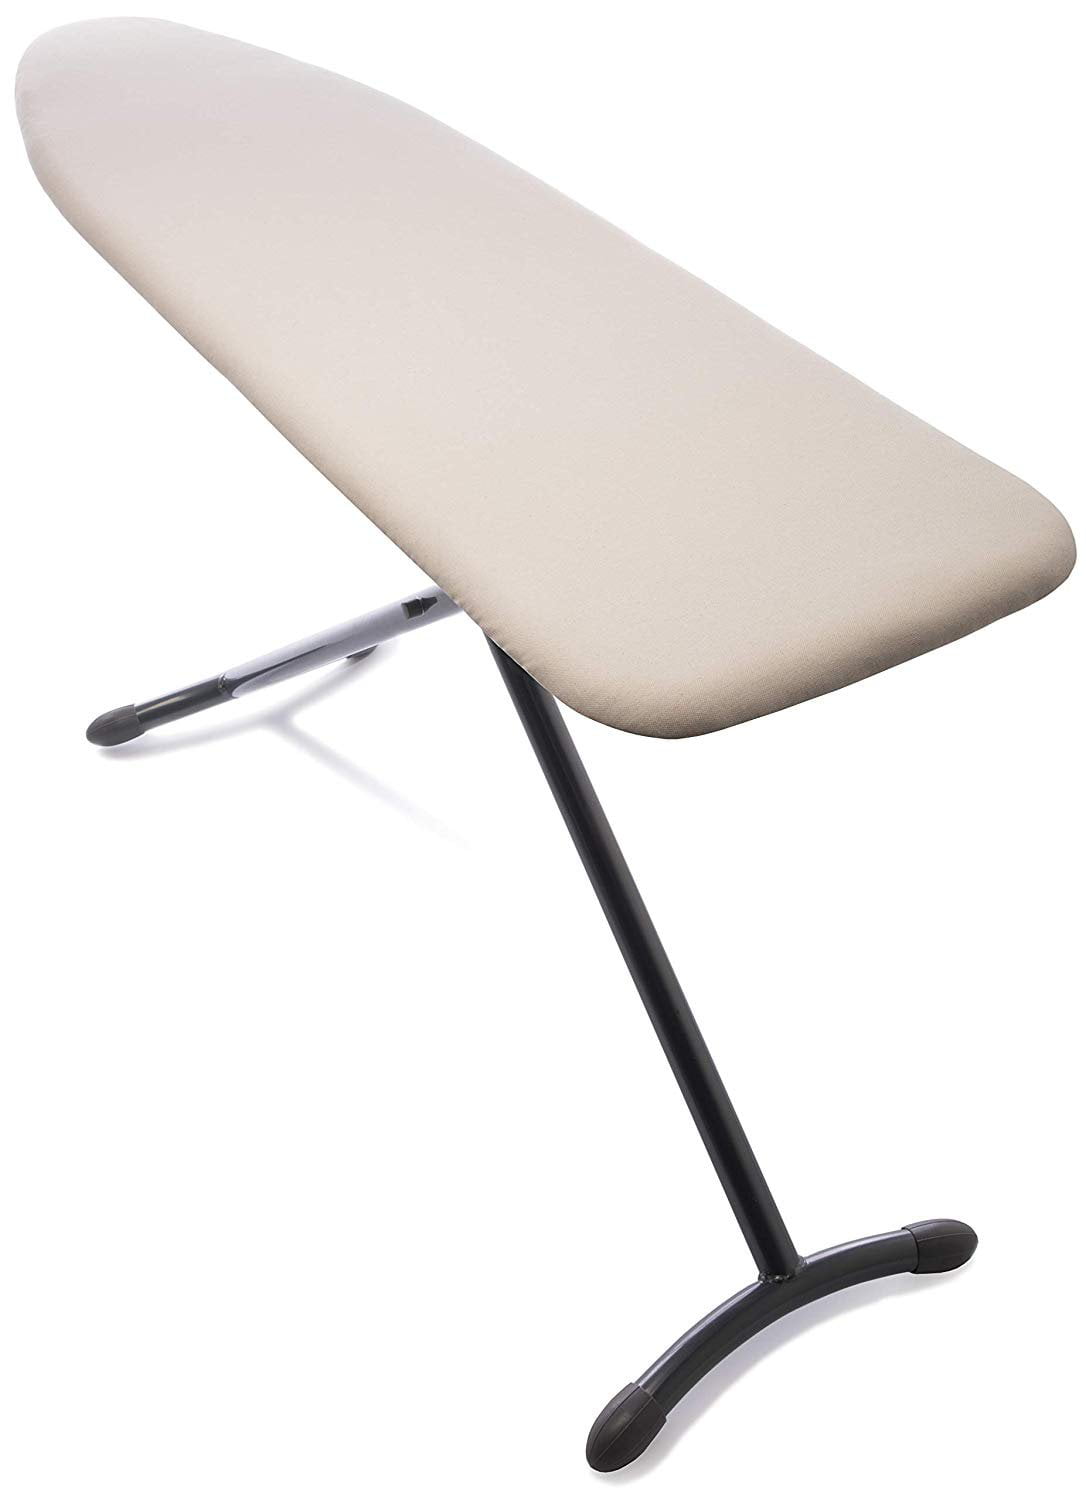 48" x 14" Ironing Board cover 100% Cotton Untreated Chemical-free Unbleached 